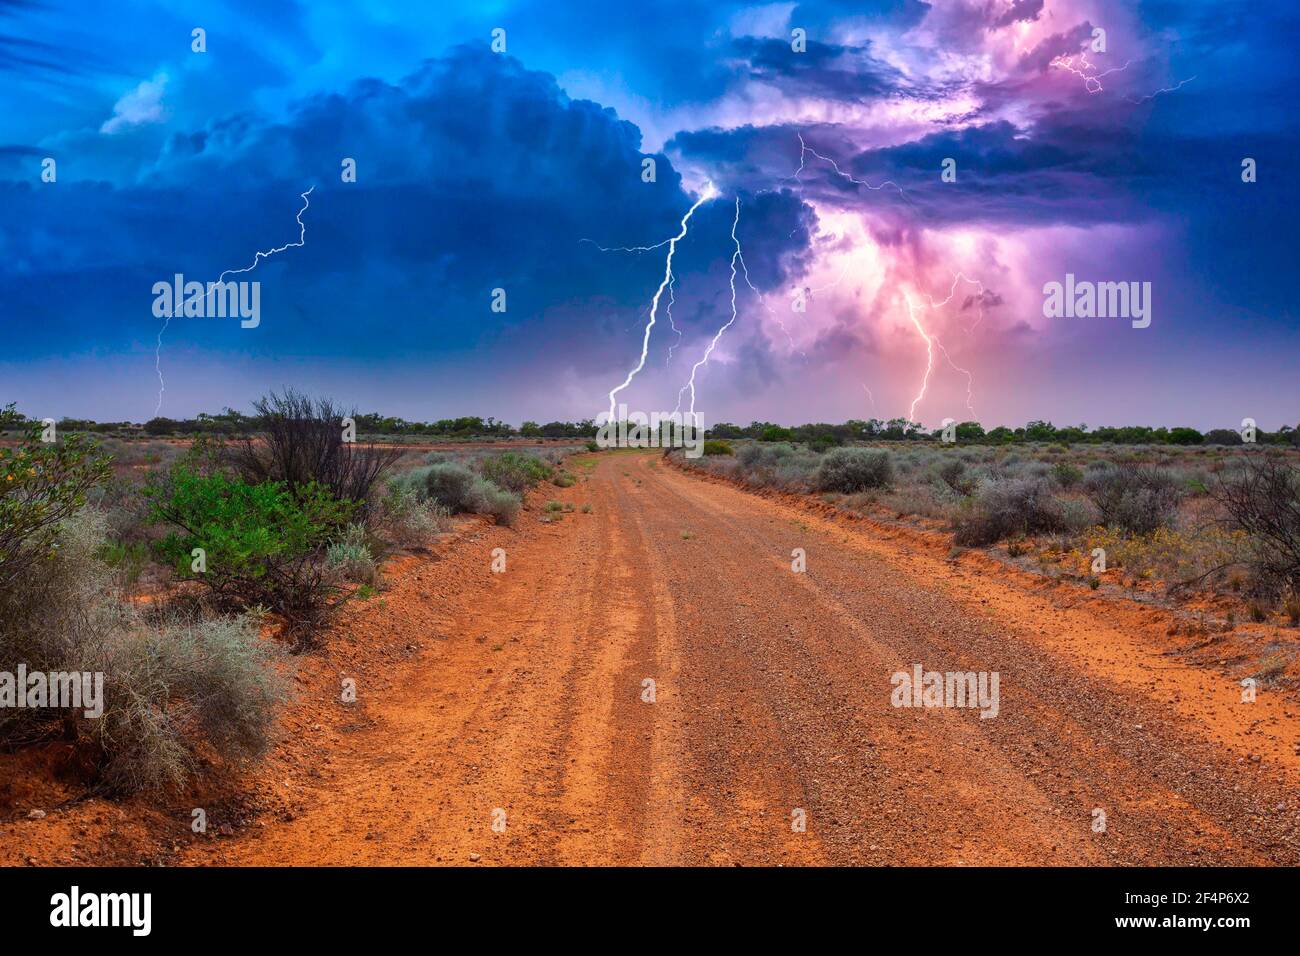 Deserted Australian outback landscape with red dirt road towards horizon with bushes in roadsides and heavy thunderstorm with white purple lightnings Stock Photo